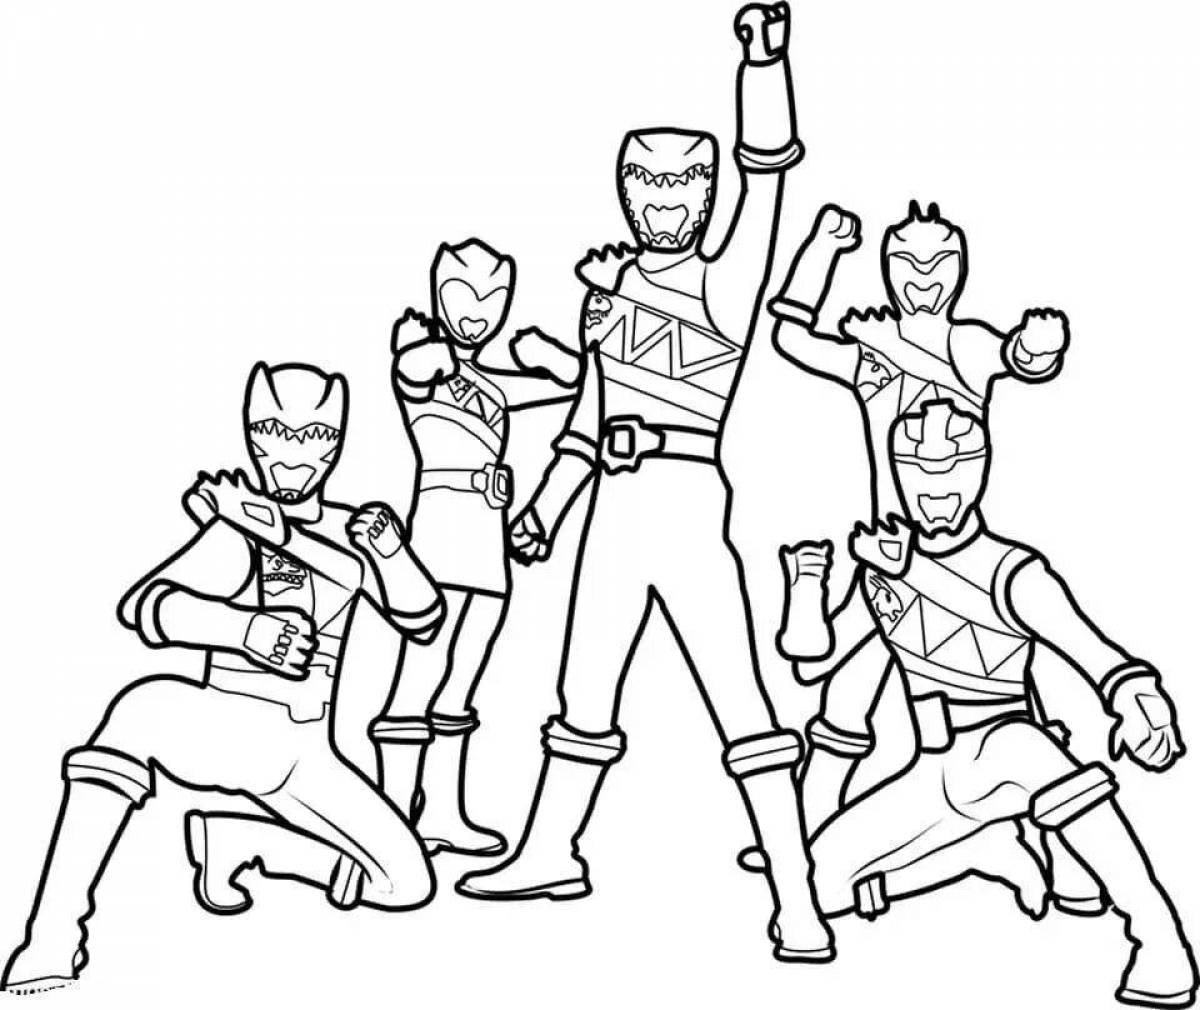 Charming power rangers coloring book